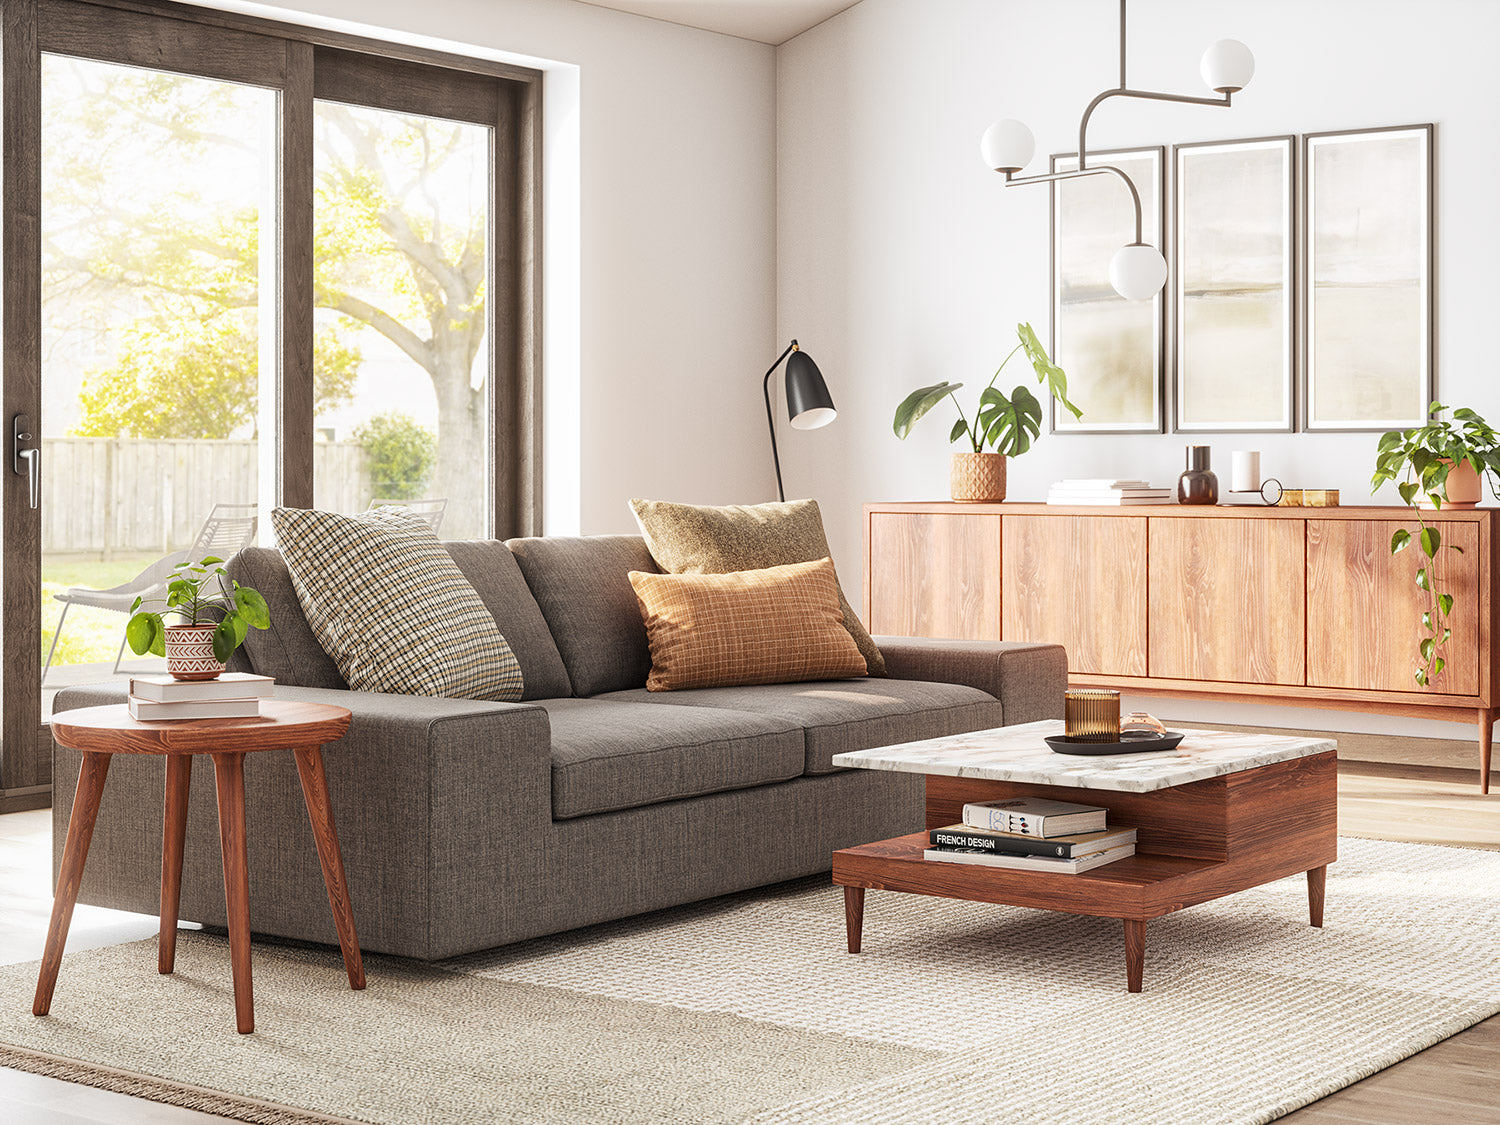 IRL: Shown in Walnut wood with Blumen Sofa in Smart Aluminum fabric and the Emelia 4-Door Credenza and Sino Coffee Table in walnut